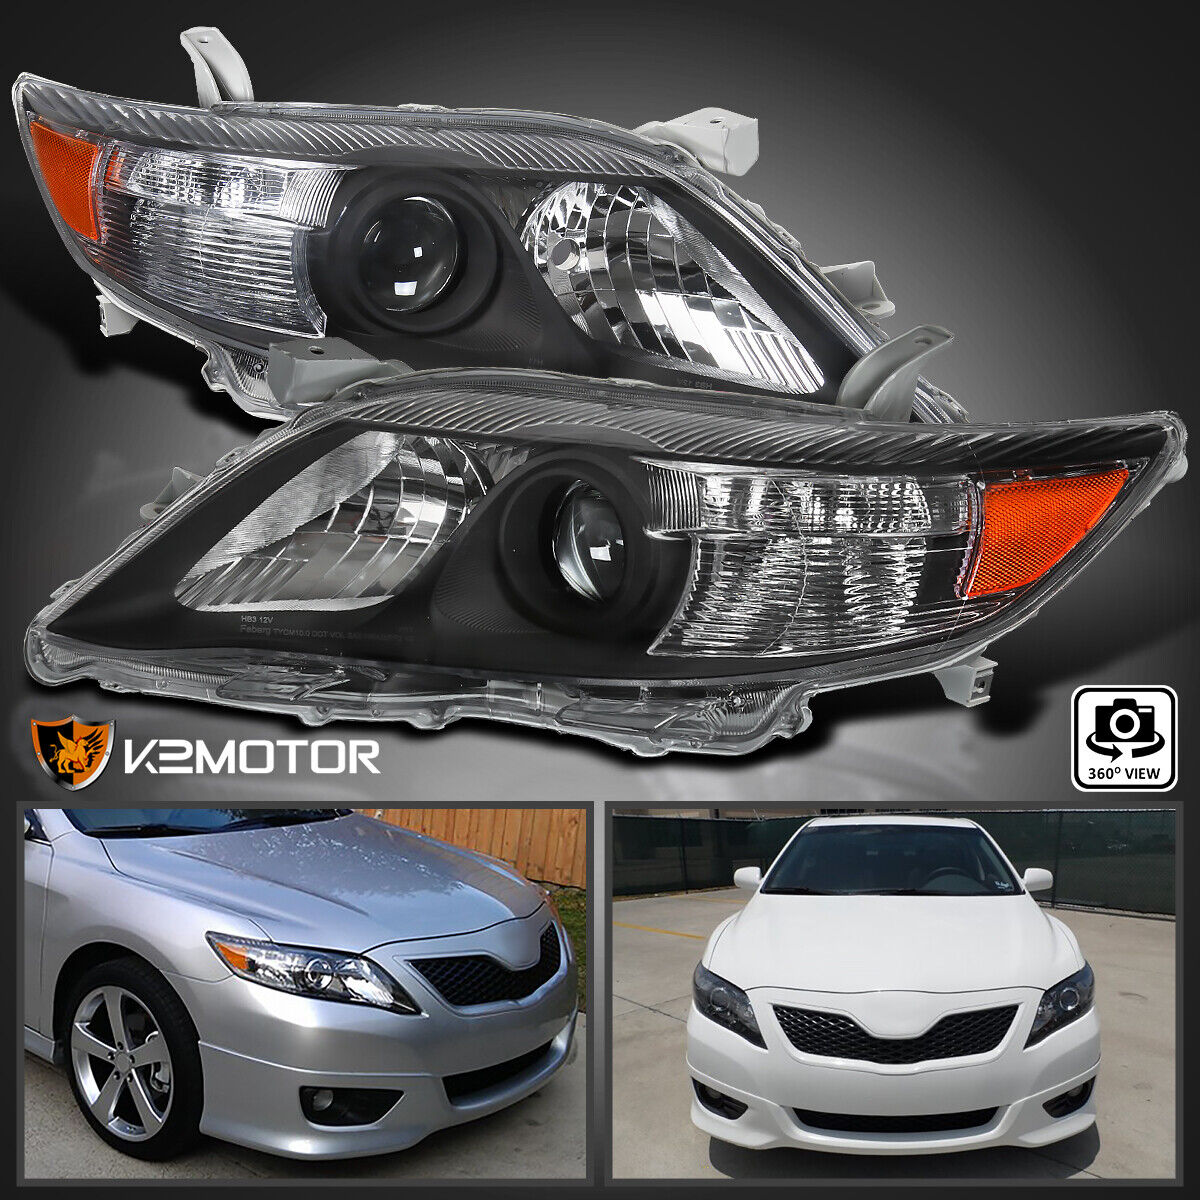 Black Fits 2010-2011 Toyota Camry Projector Headlights Left+Right Replacement